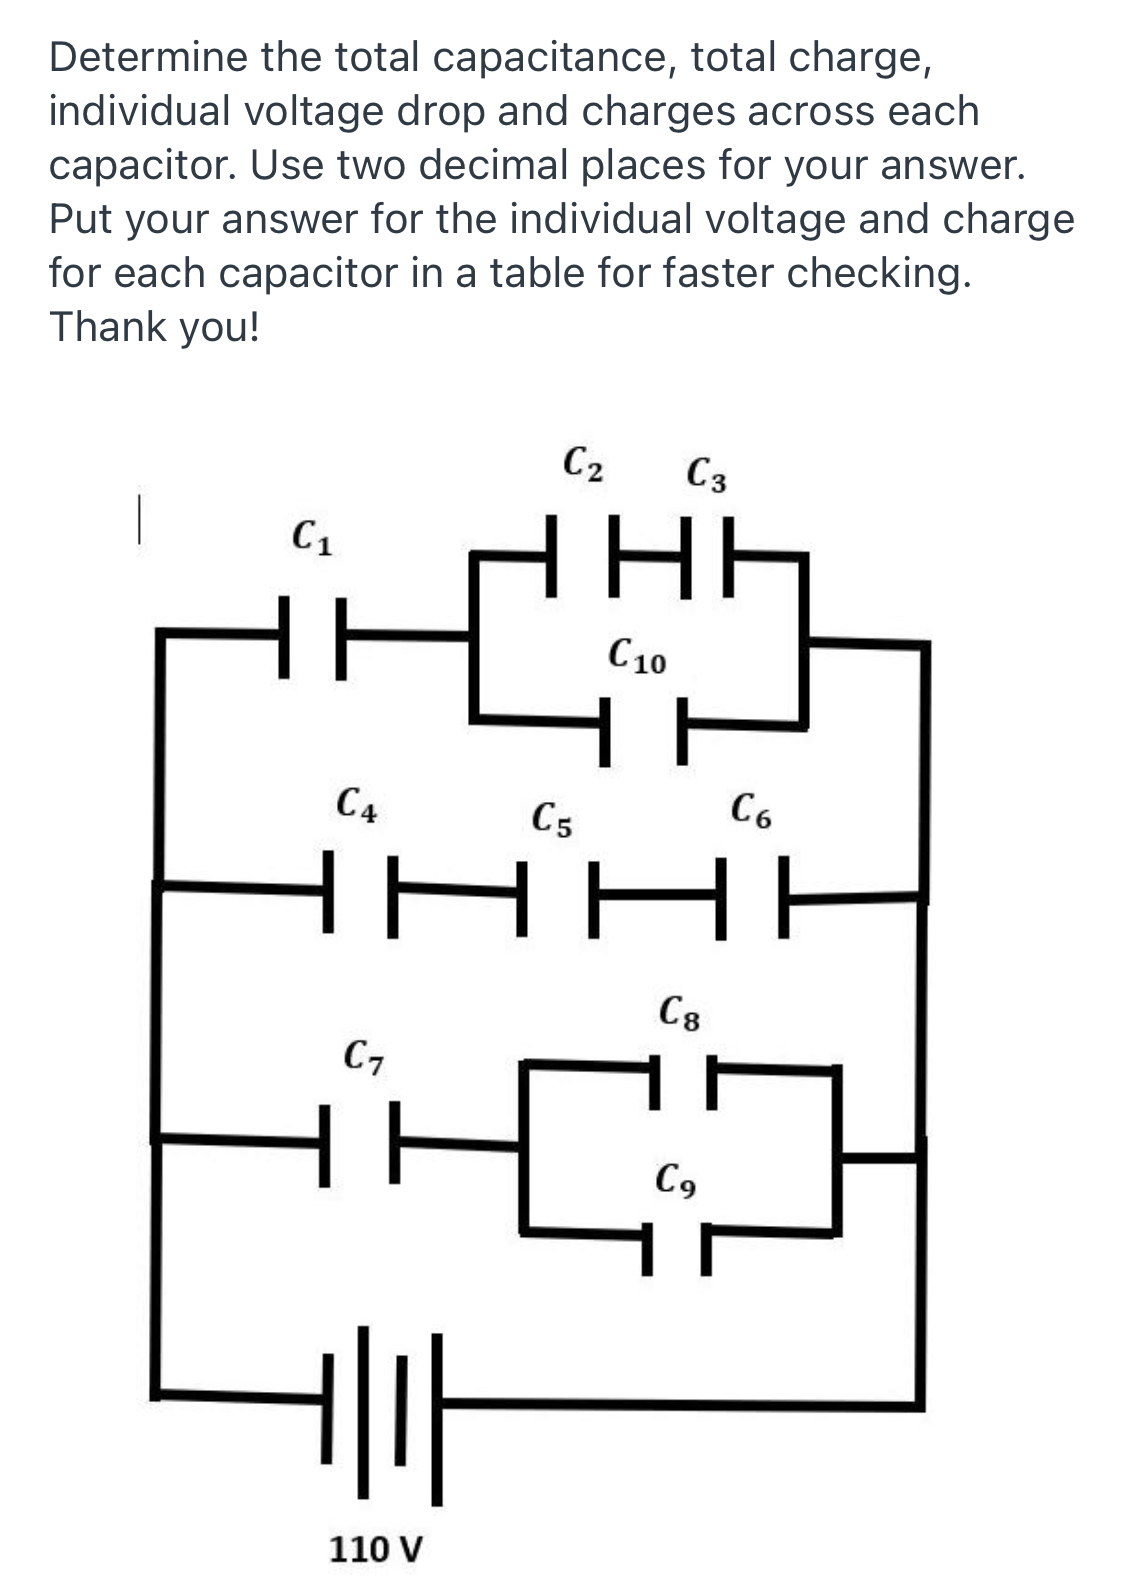 Determine the total capacitance, total charge,
individual voltage drop and charges across each
capacitor. Use two decimal places for your answer.
Put your answer for the individual voltage and charge
for each capacitor in a table for faster checking.
Thank you!
C2
C3
|
HE
C1
C10
C4
C5
C6
C8
C7
C9
110 V
